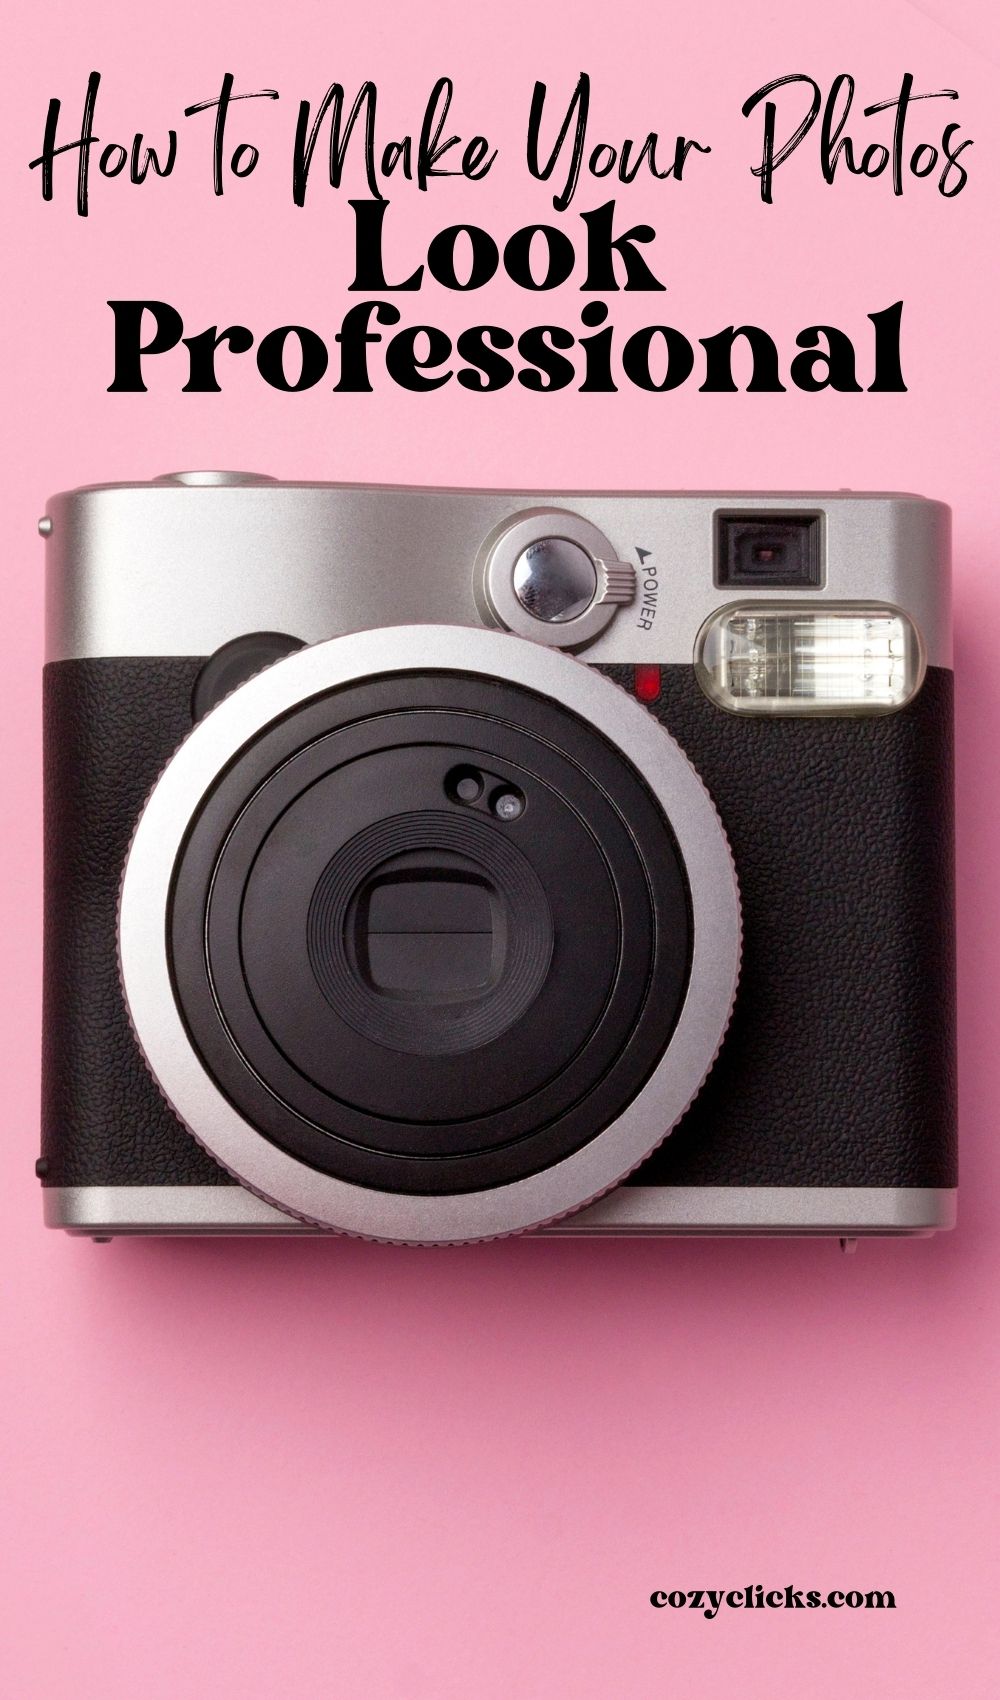 Learn photography tips for making your photos look more professional. Easy to follow even if you are not a professional photographer!